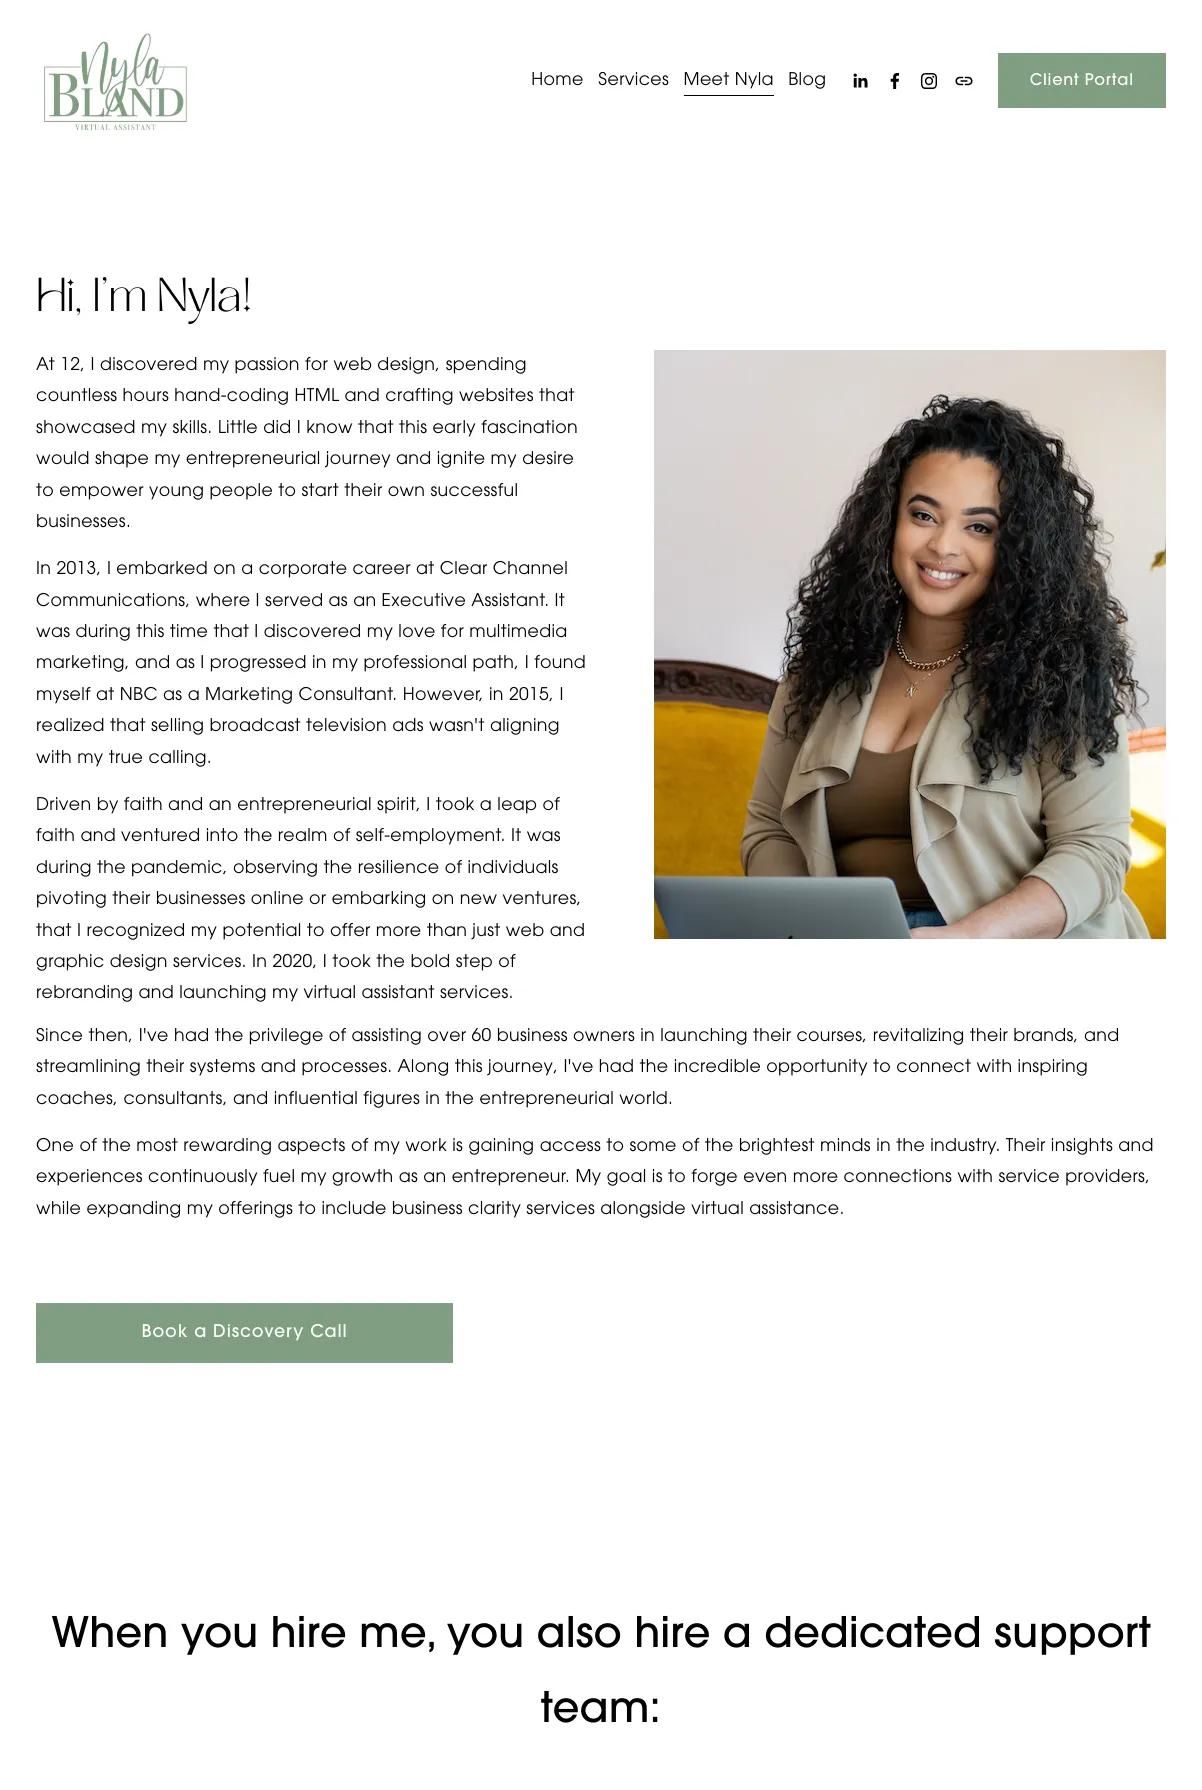 Screenshot 3 of Nyla Bland (Example Squarespace Virtual Assistant Website)